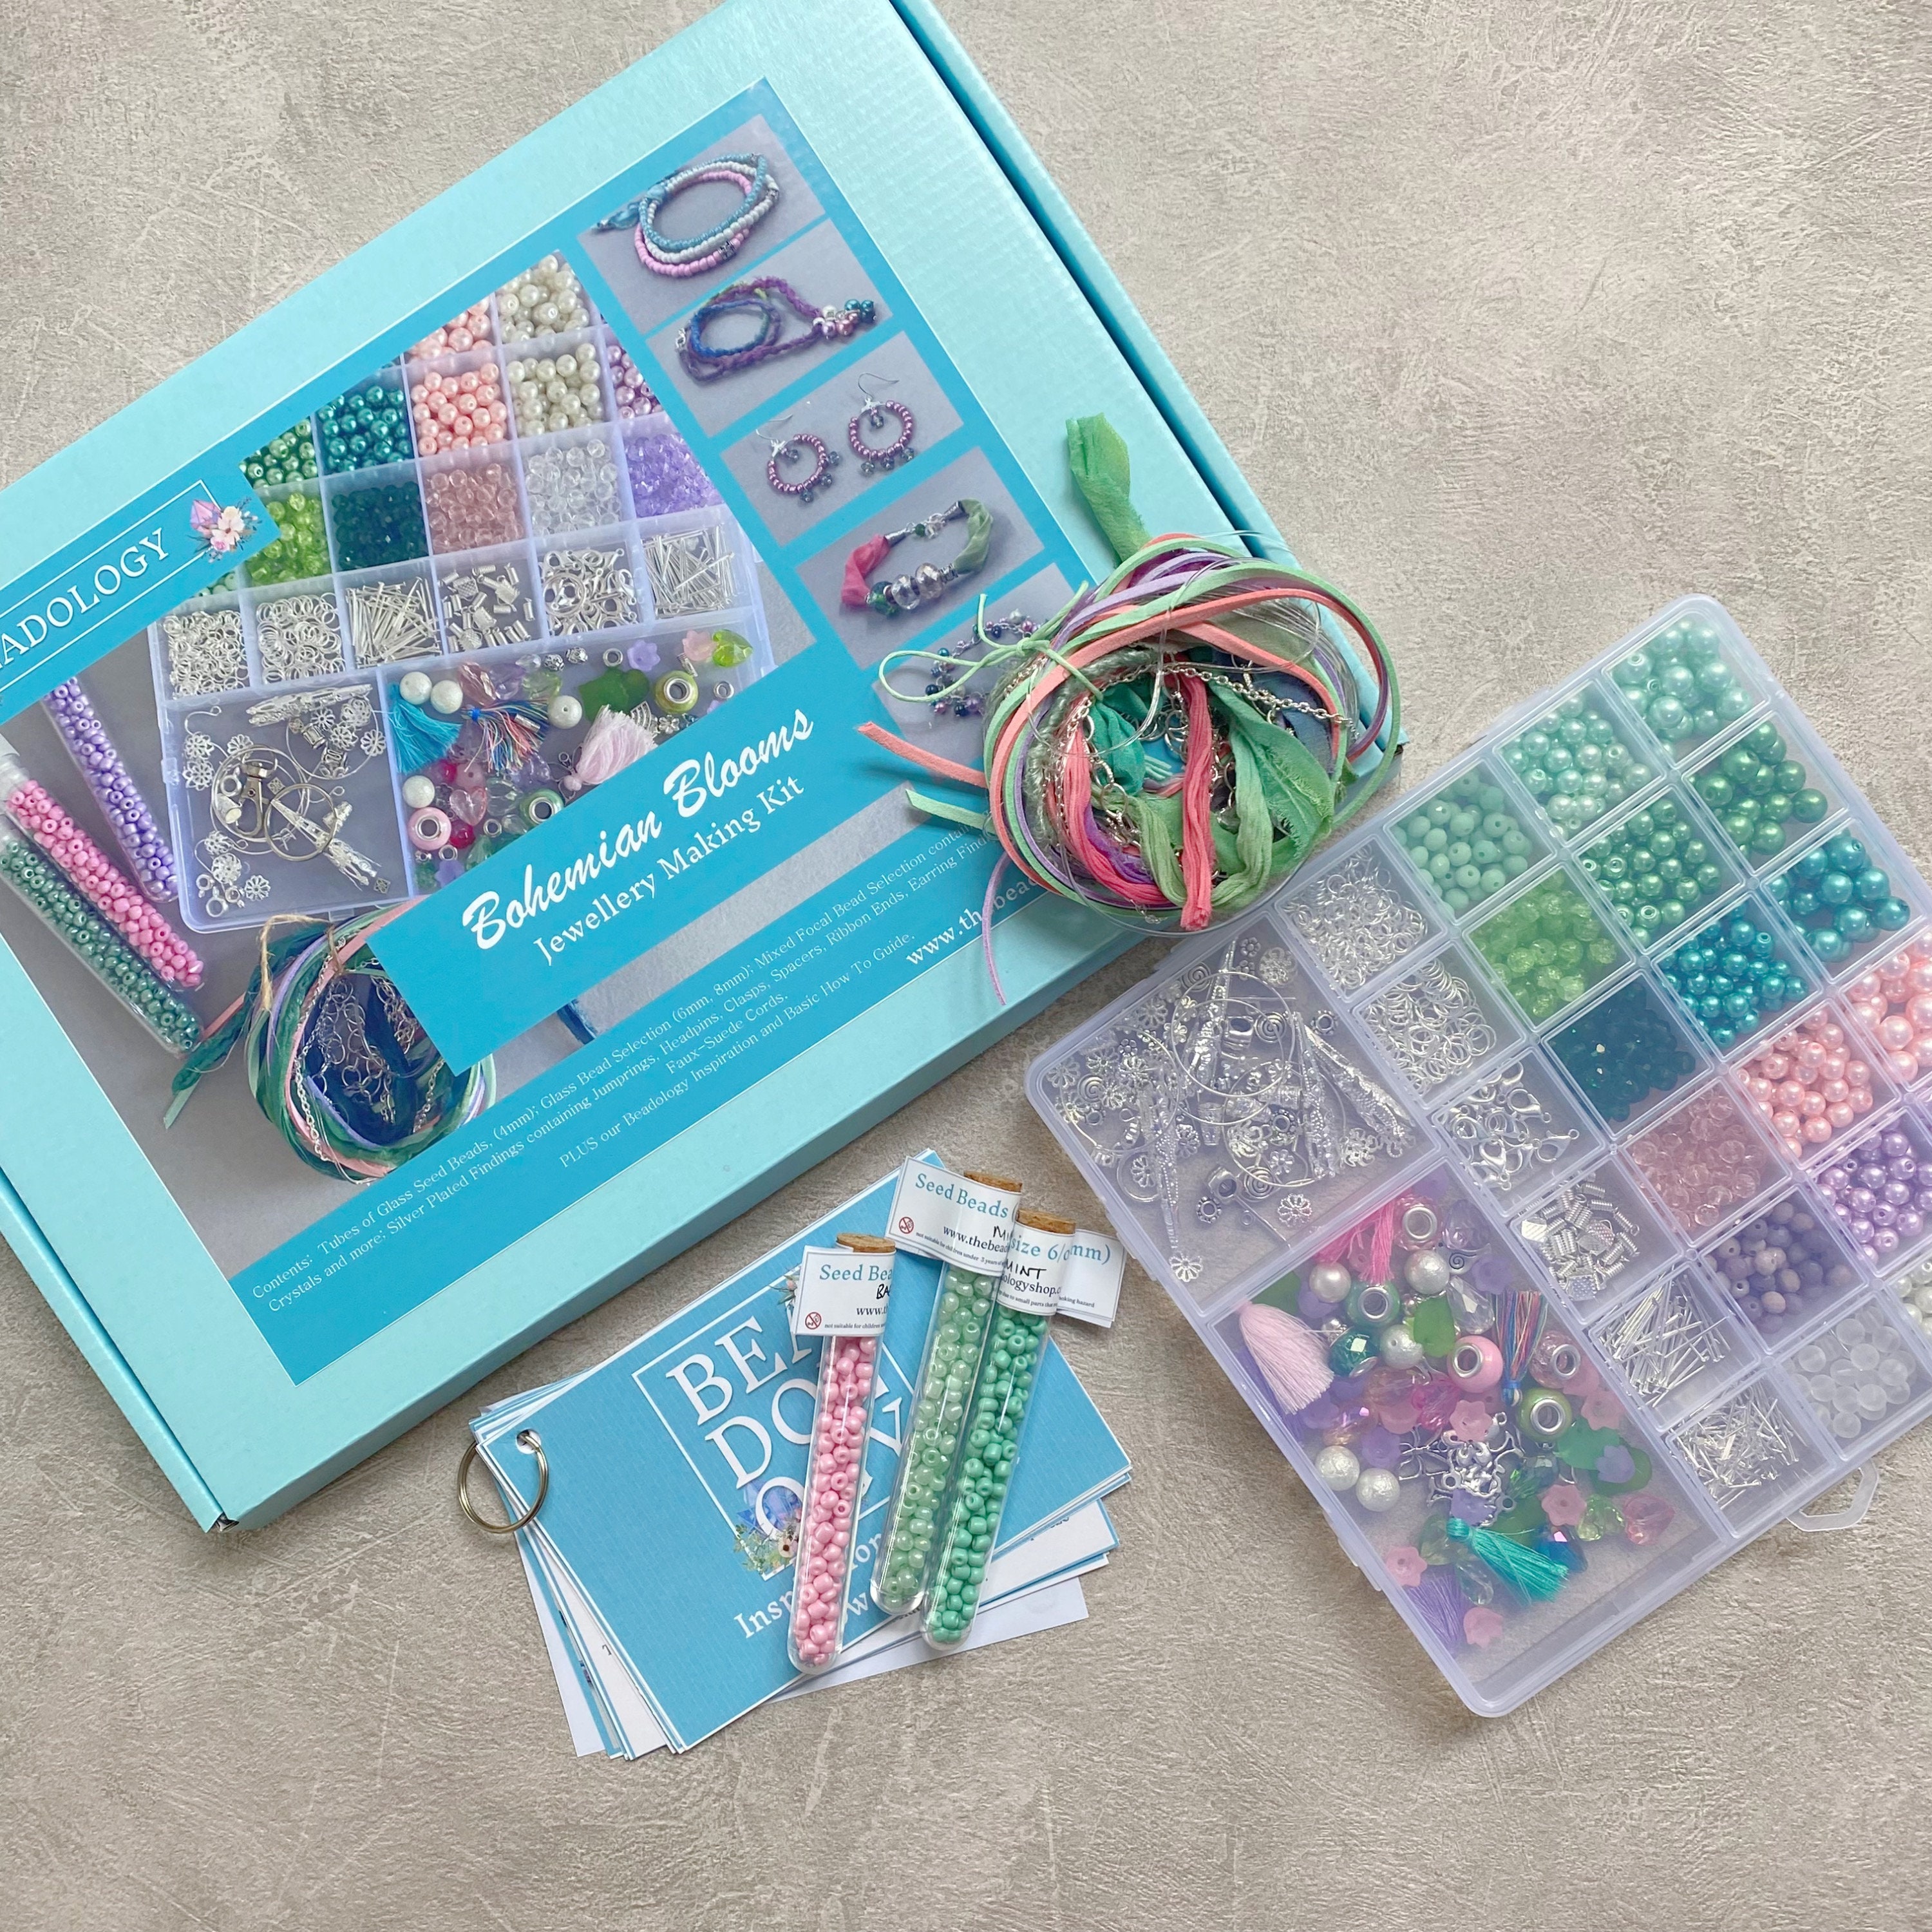 Gemstone Chip DIY Jewellery Making Kit for Teen Girls to Adults